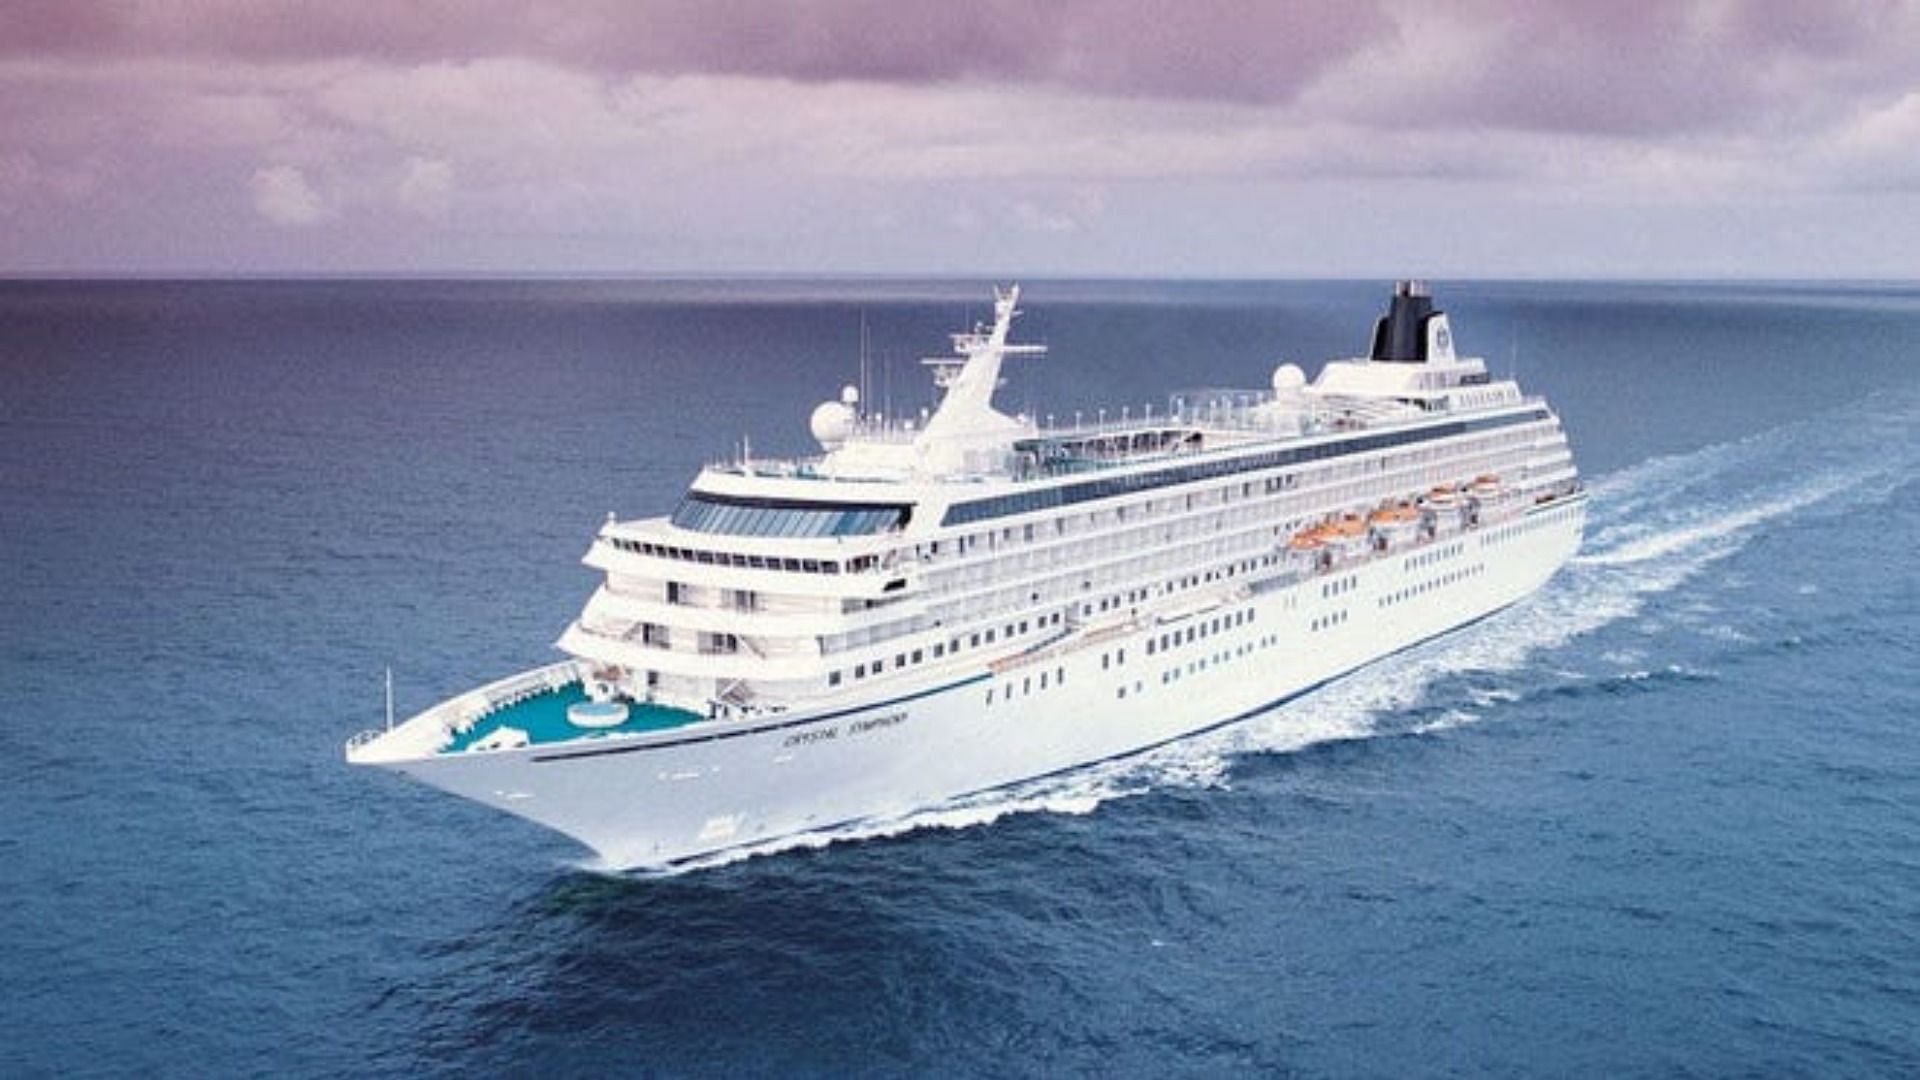 Crystal Symphony was deviated from its originally scheduled port of Miami to Bimini in the Bahamas (Image via Crystal Cruises)